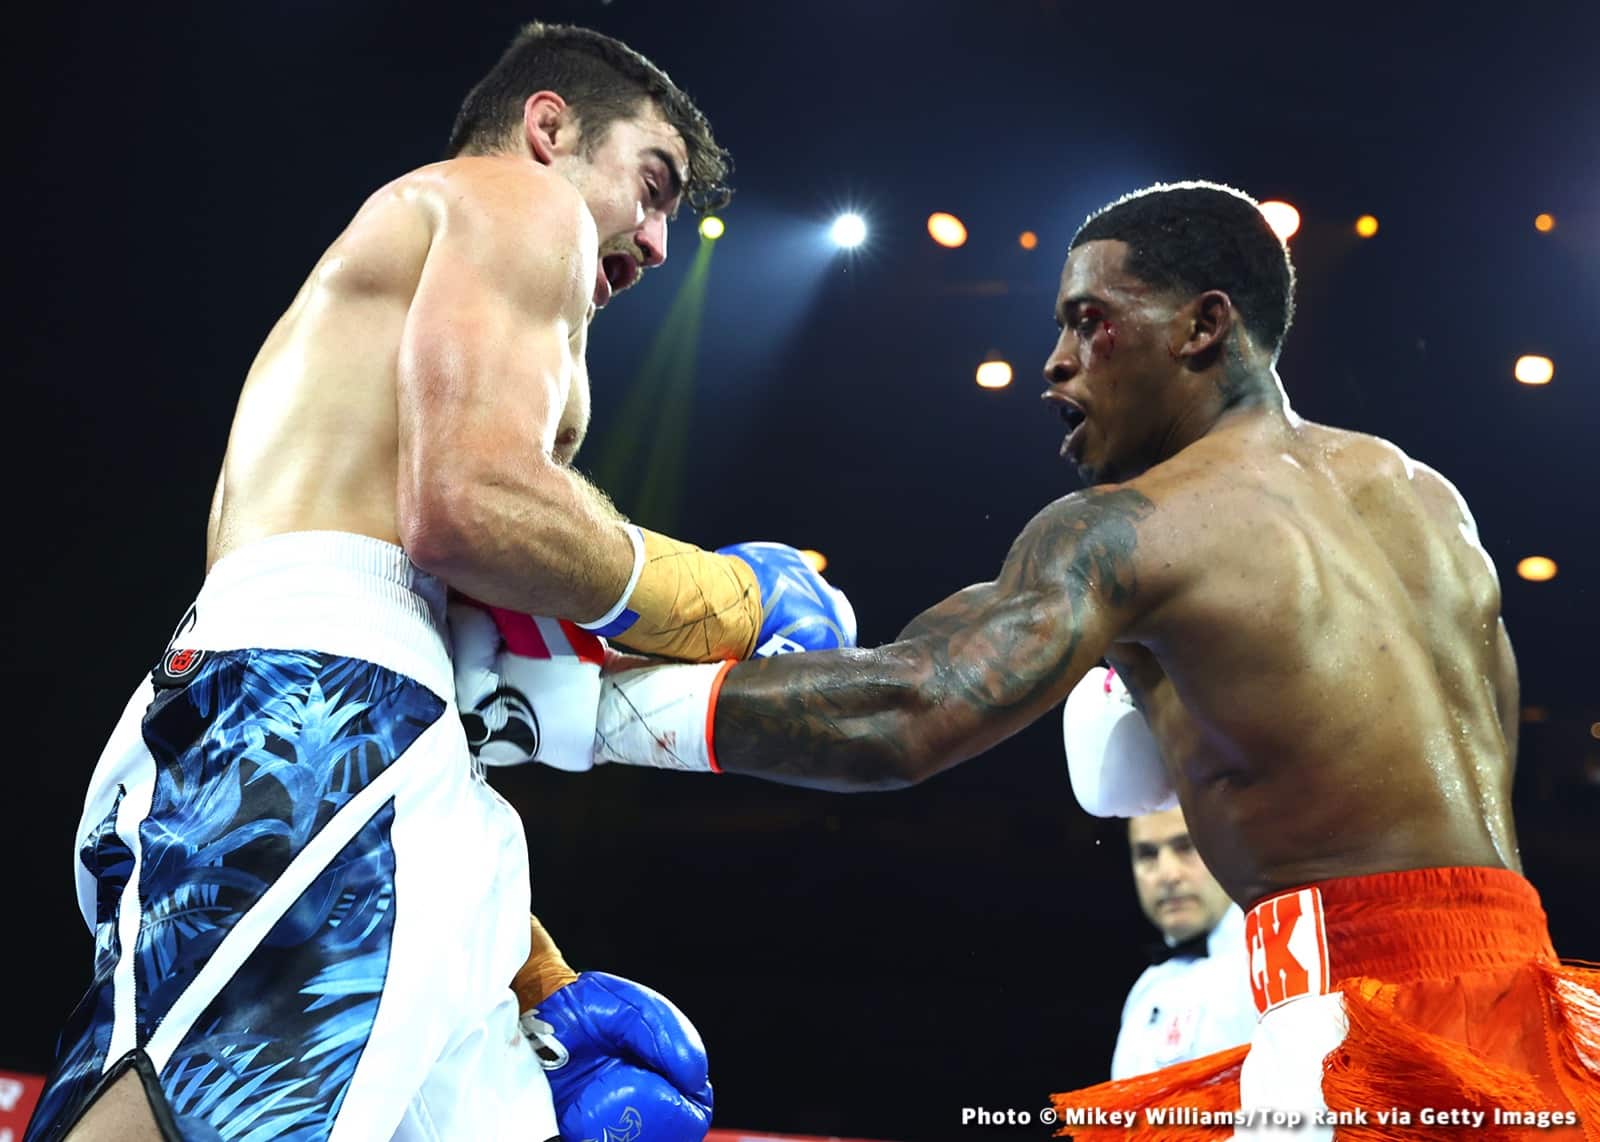 Image: Haney vs. Kambosos II - Live results for tonight's rematch on ESPN